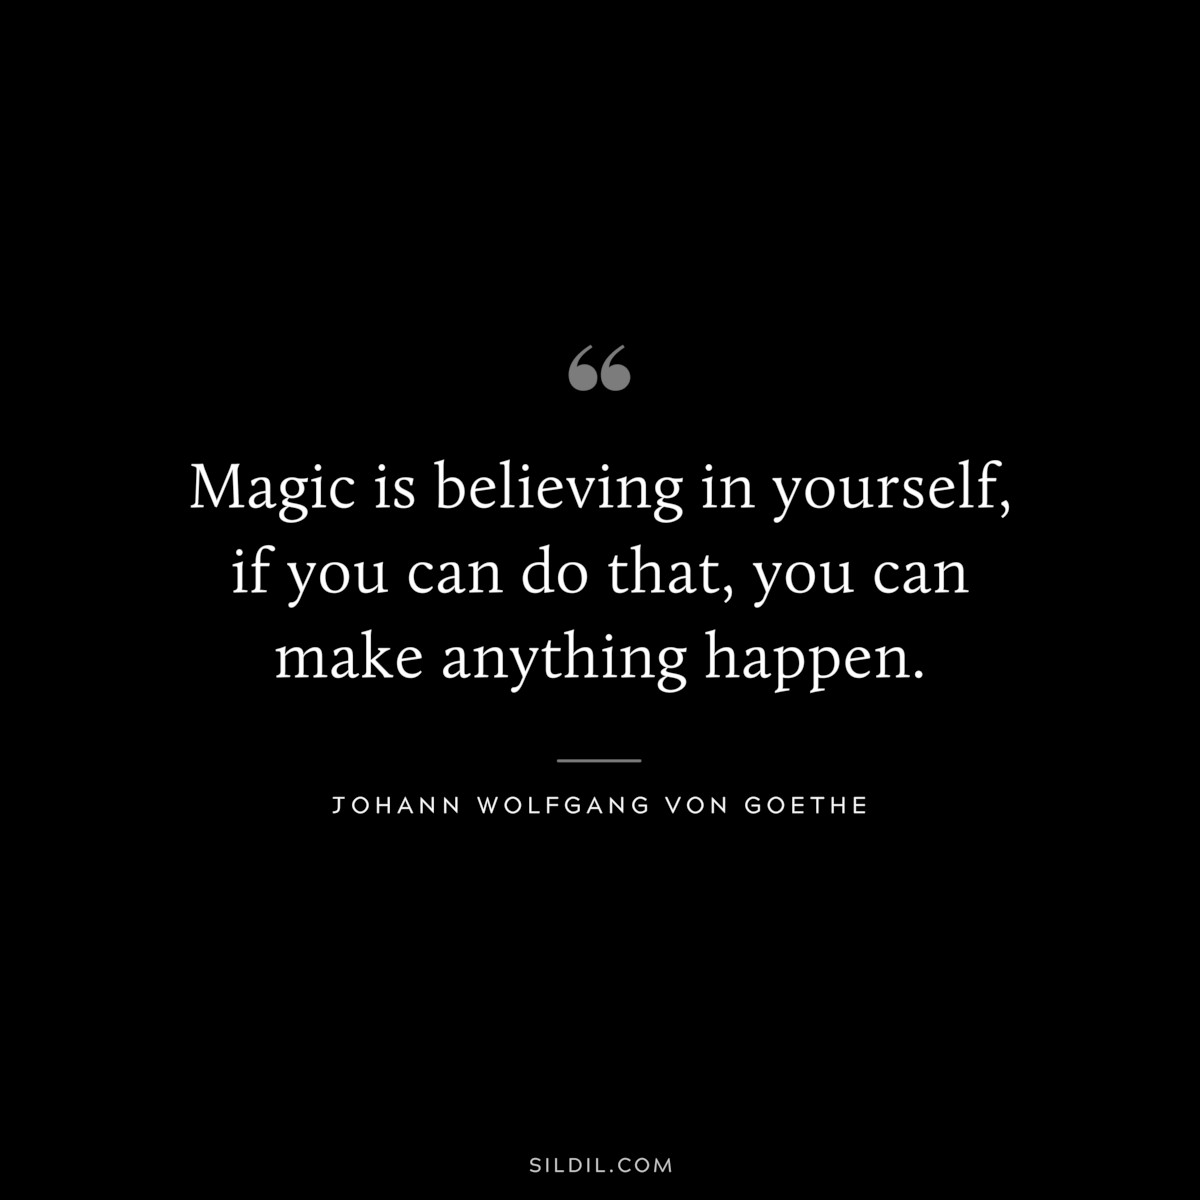 Magic is believing in yourself, if you can do that, you can make anything happen.― Johann Wolfgang von Goethe